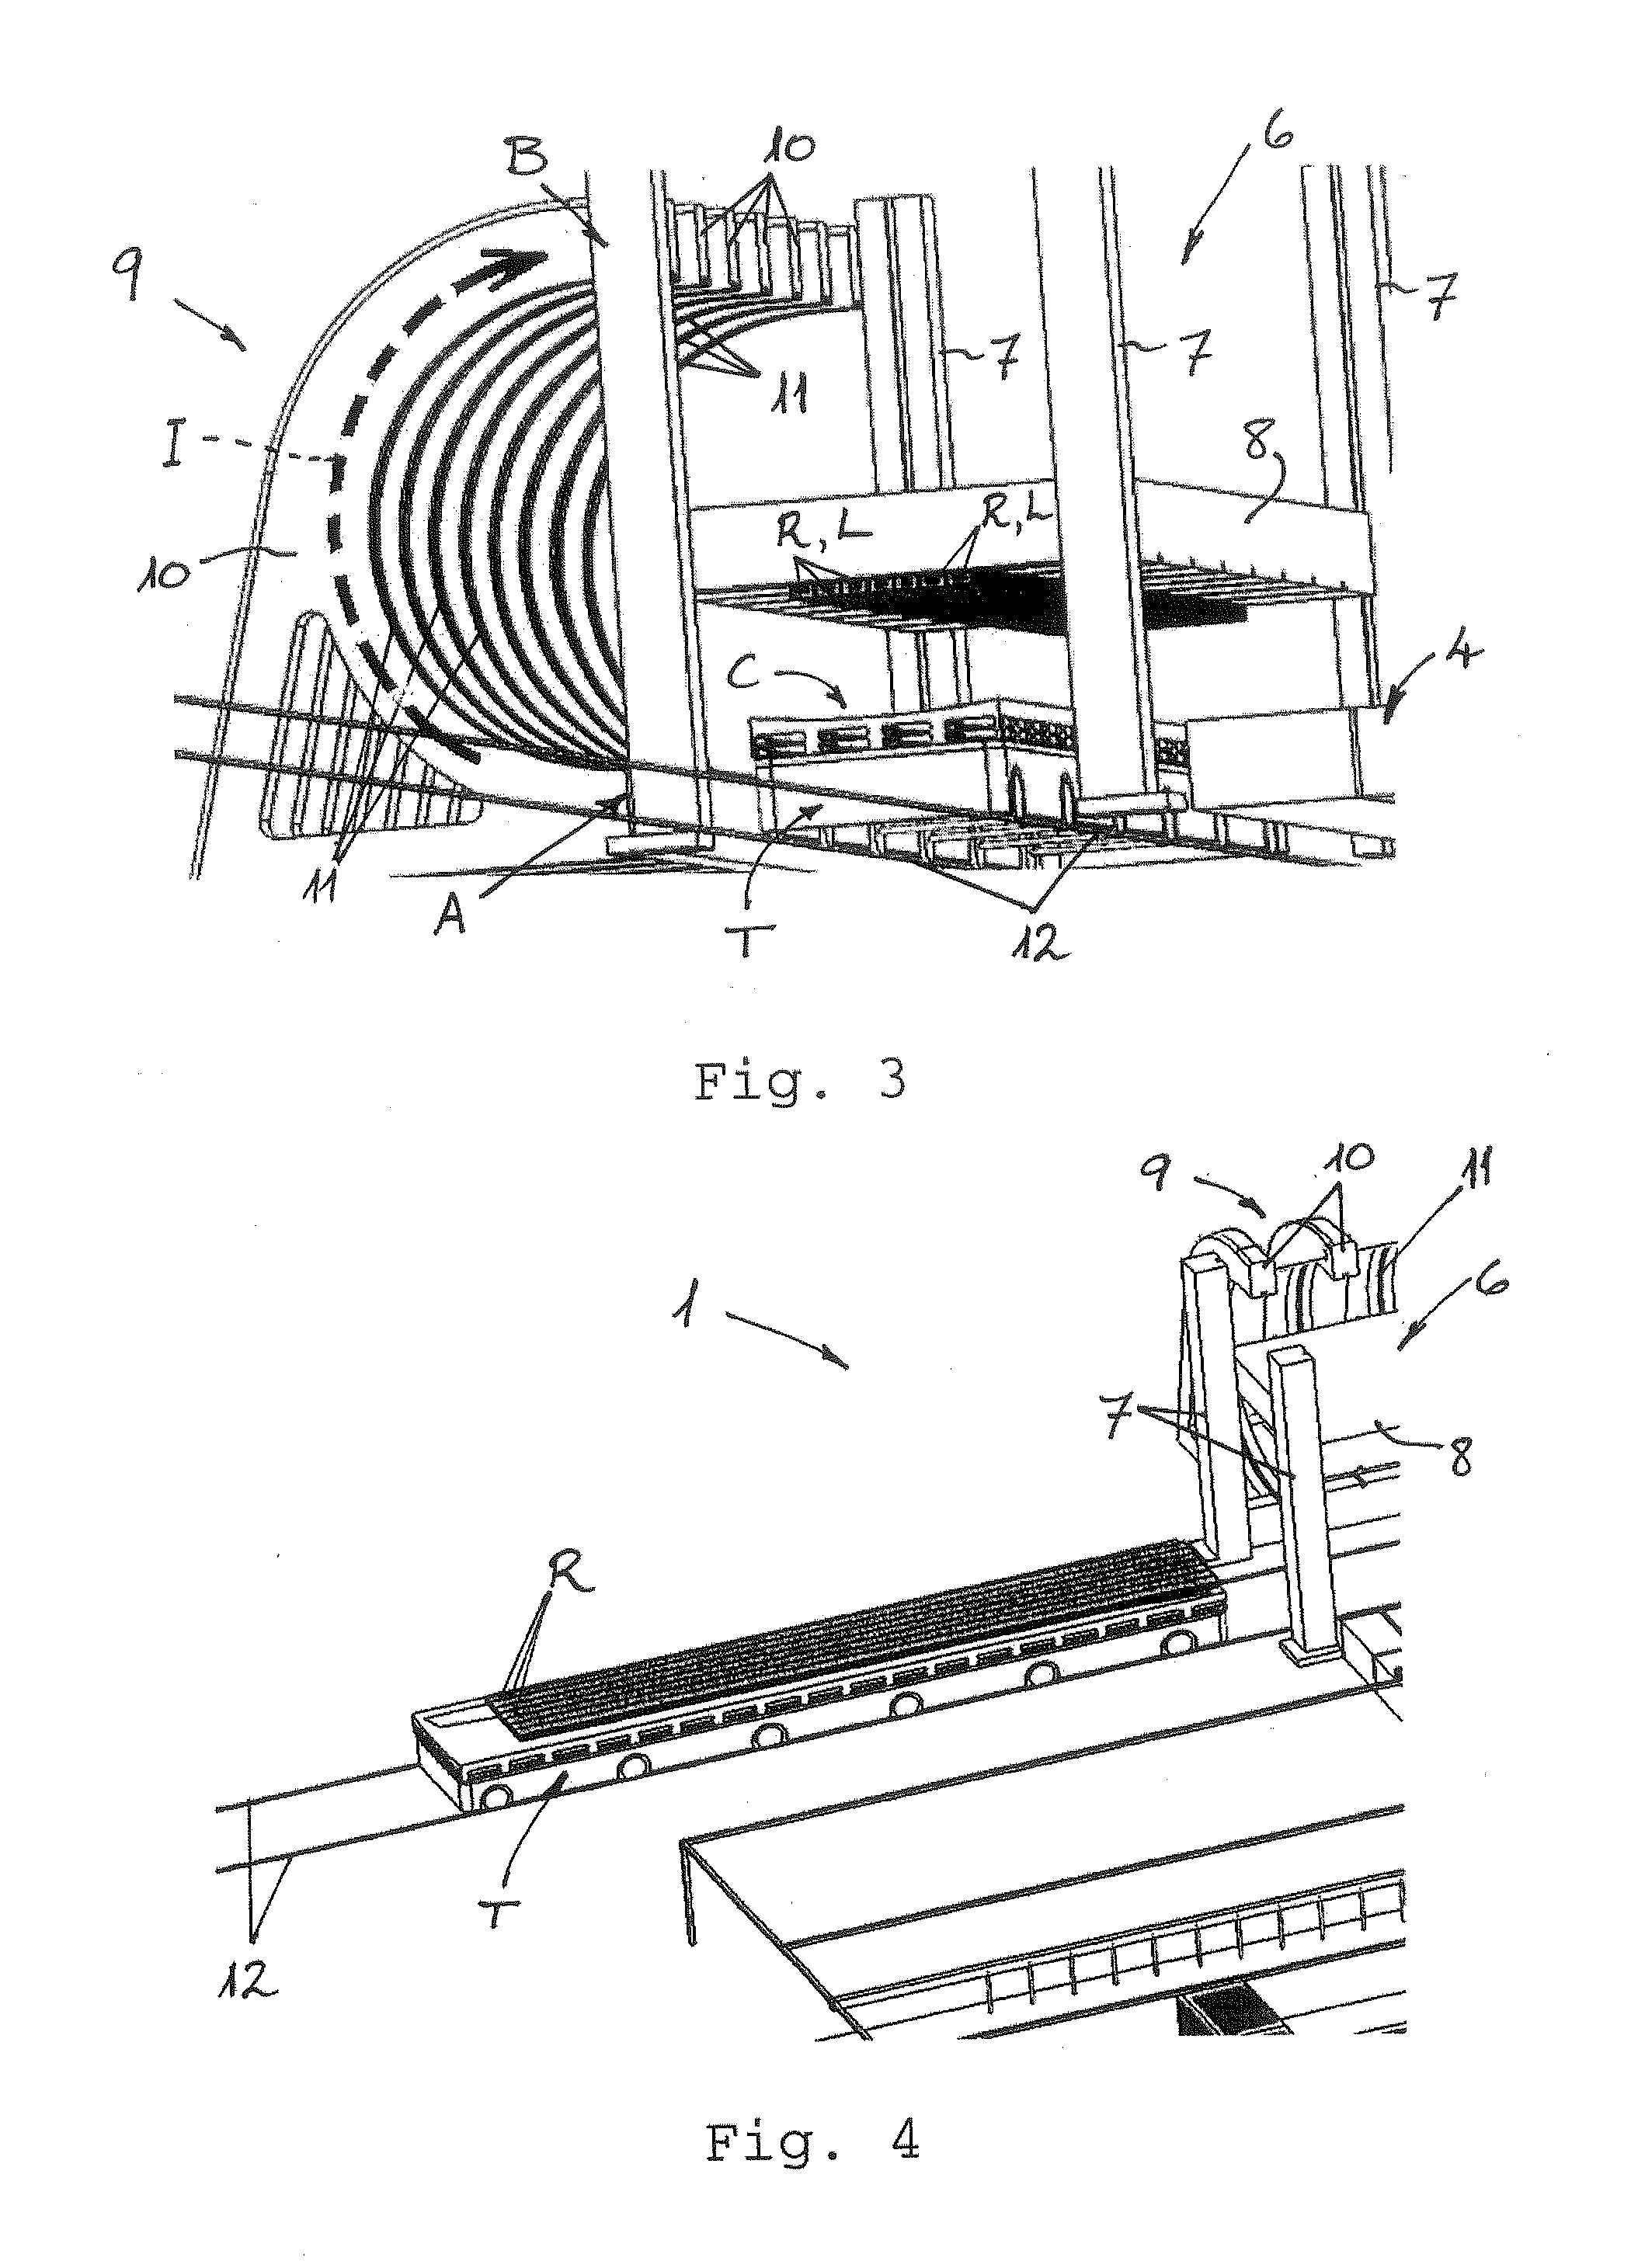 System and method of manufacturing composite modules